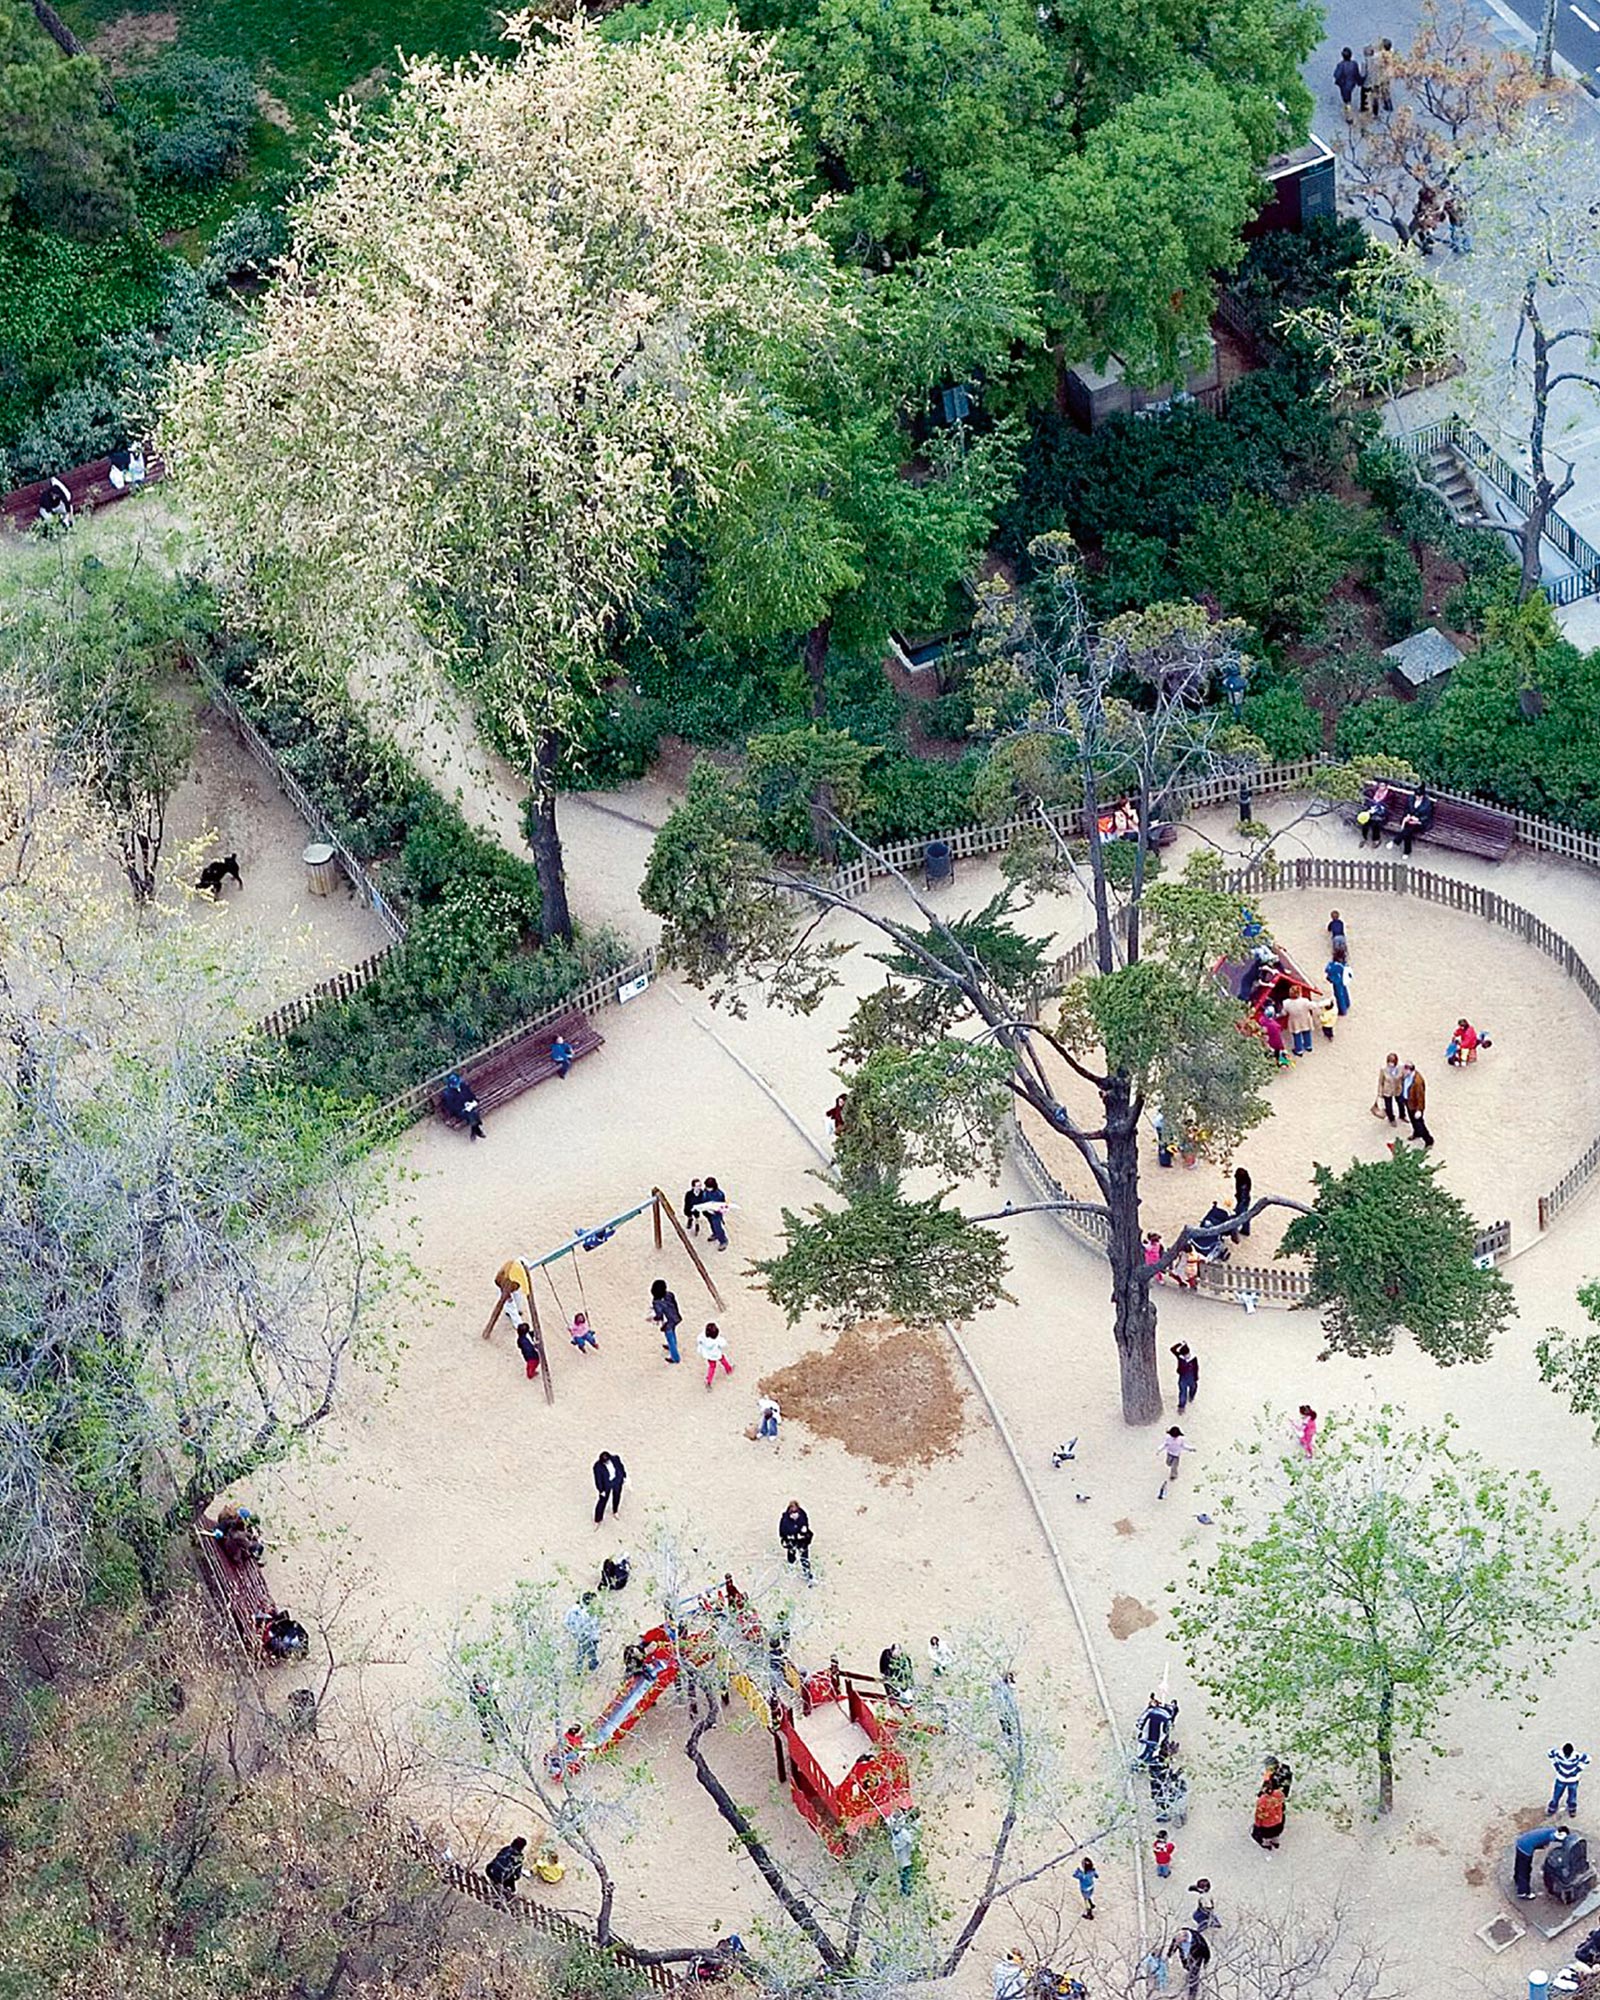 A photograph of a playground in Barcelona.